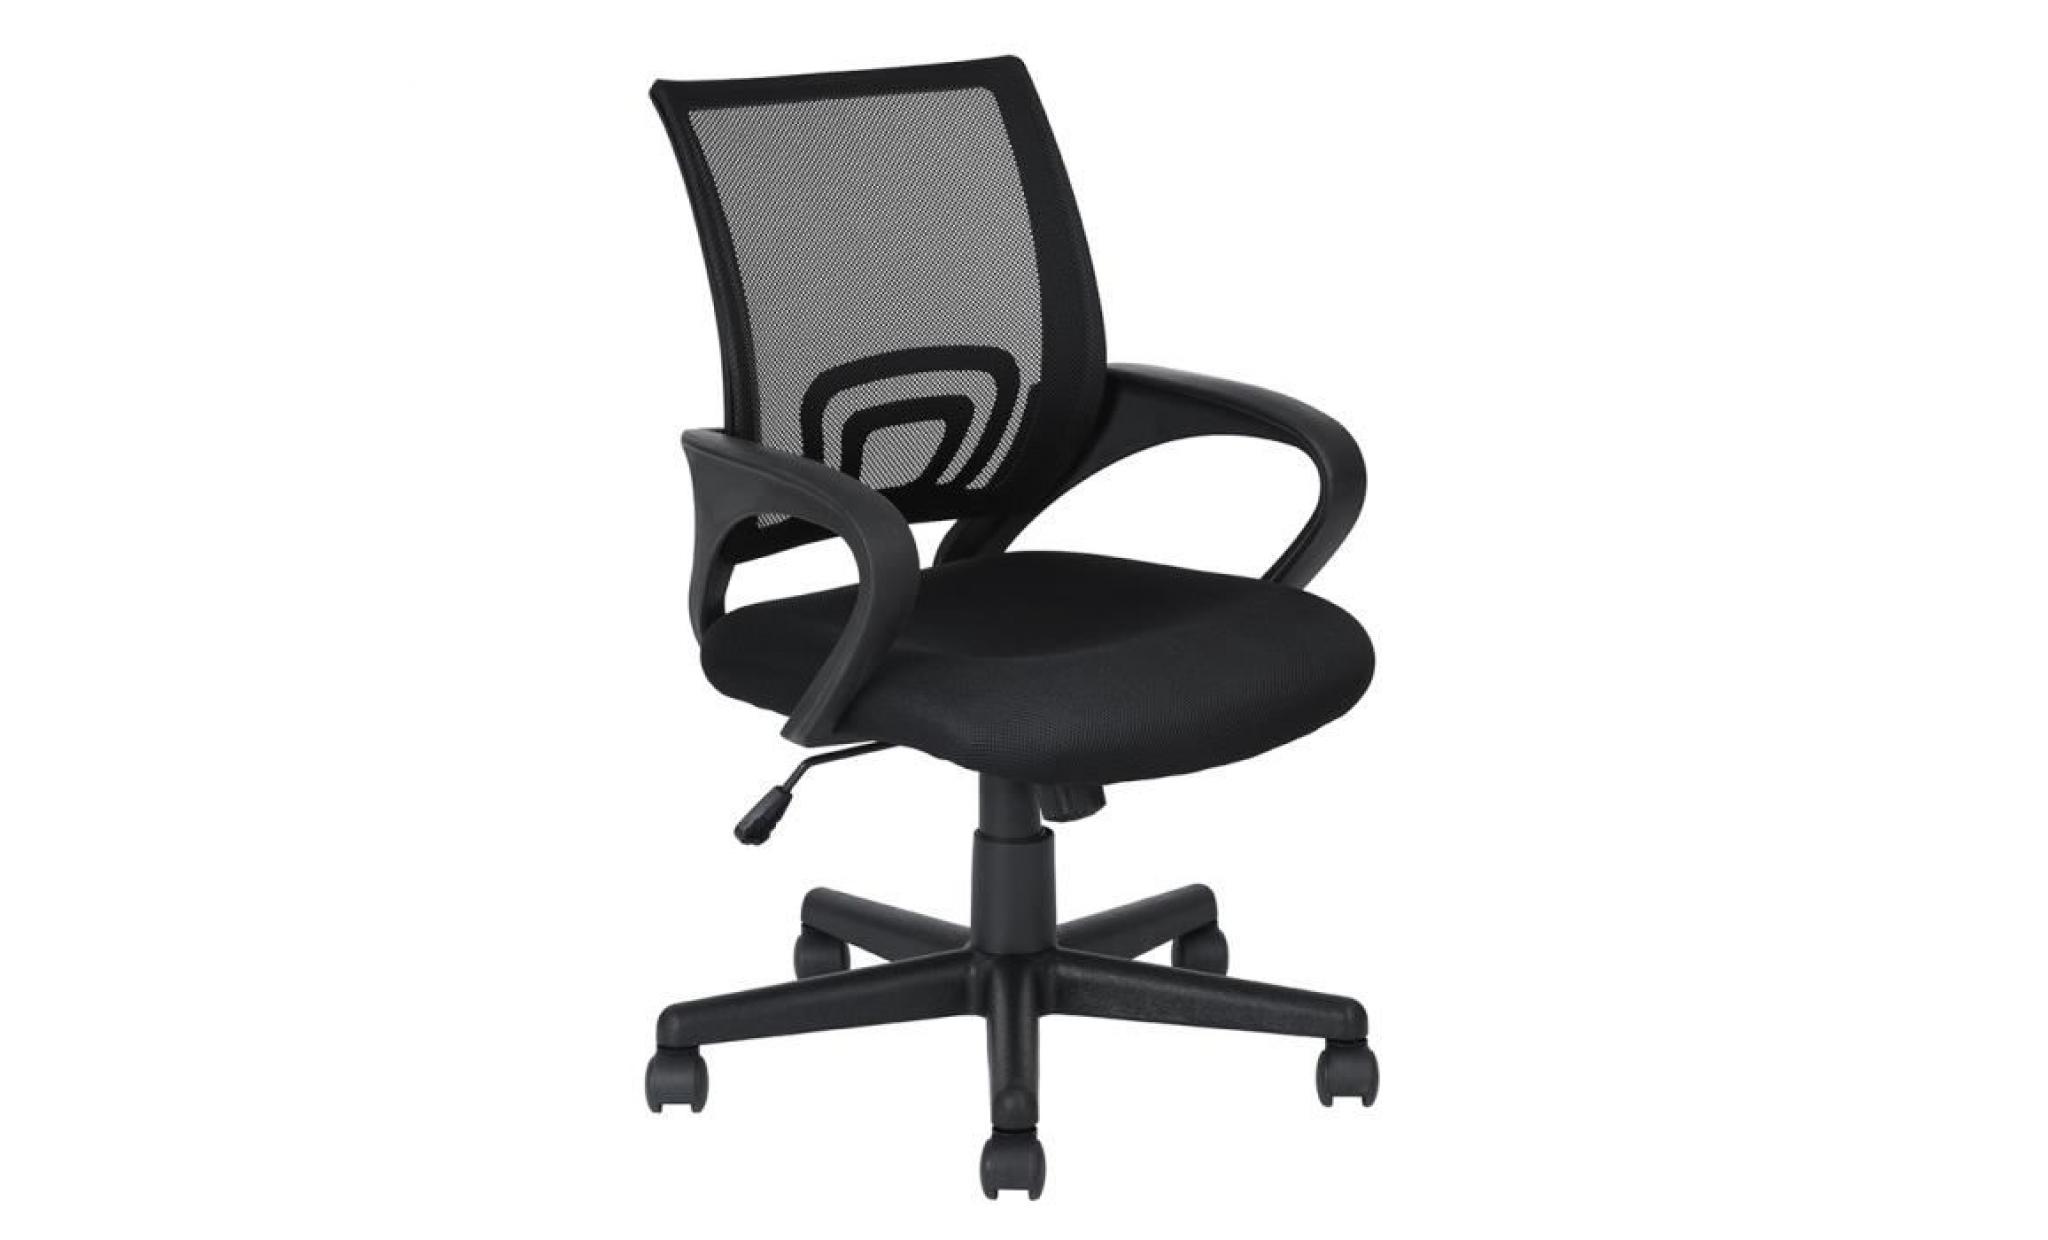 furnish 1 office chair, swivel 360 degrees, armrests and adjustable middle height backrest, 5 casters,rose